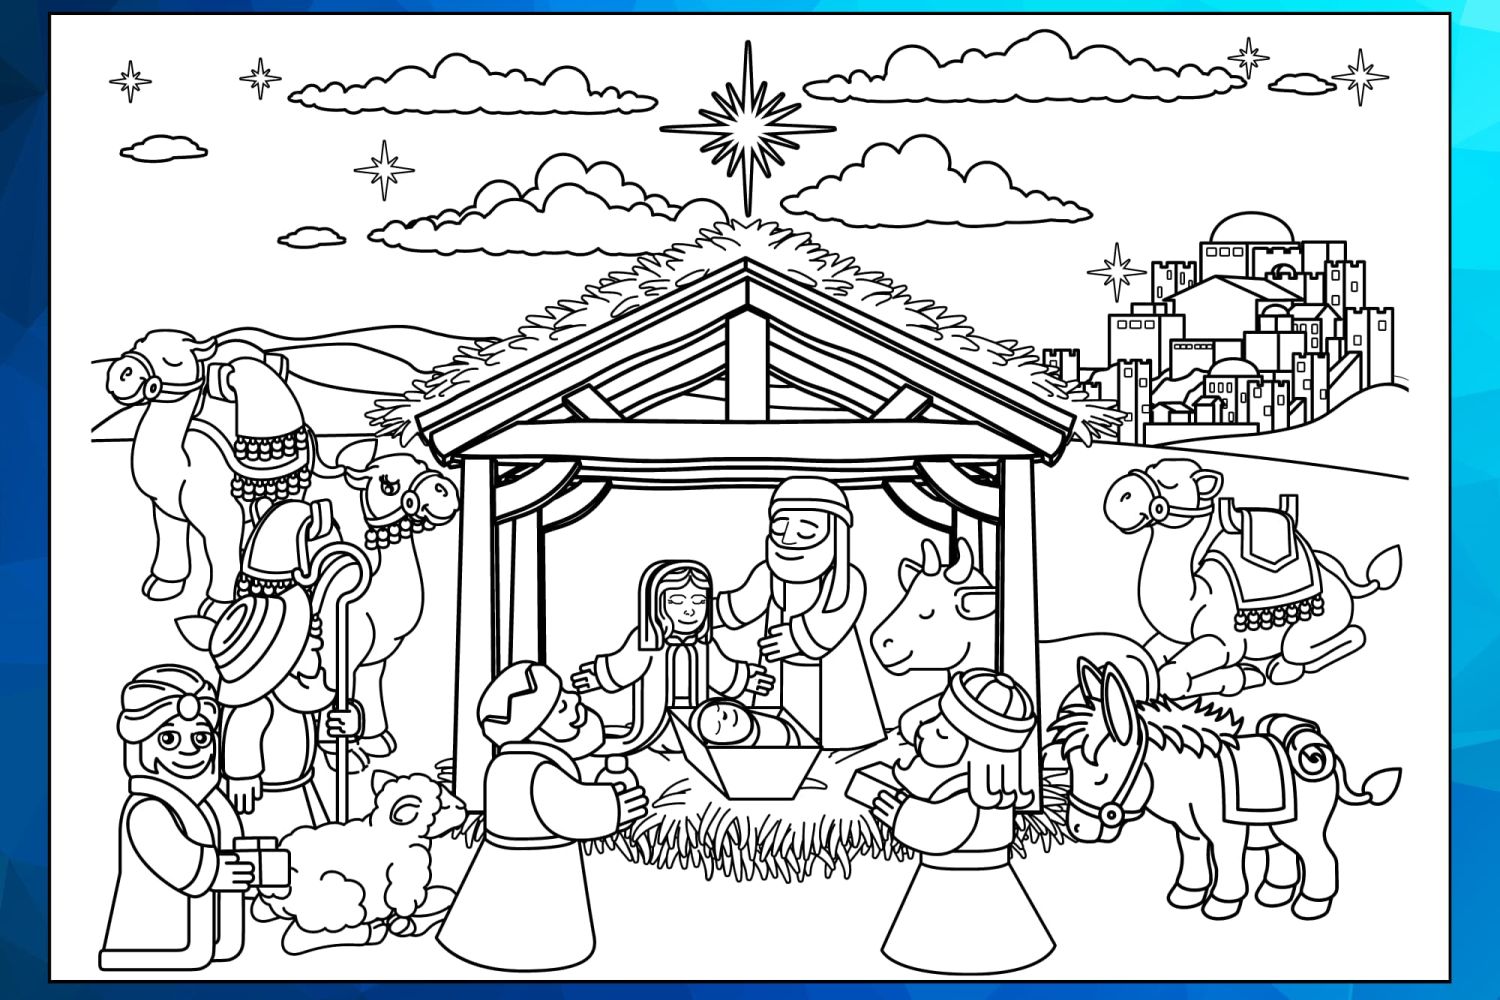 Nativity%20Scene%20Christmas%20Coloring%20Pages%20Worksheet%201-175b3fa4 Mary (mother of Jesus)